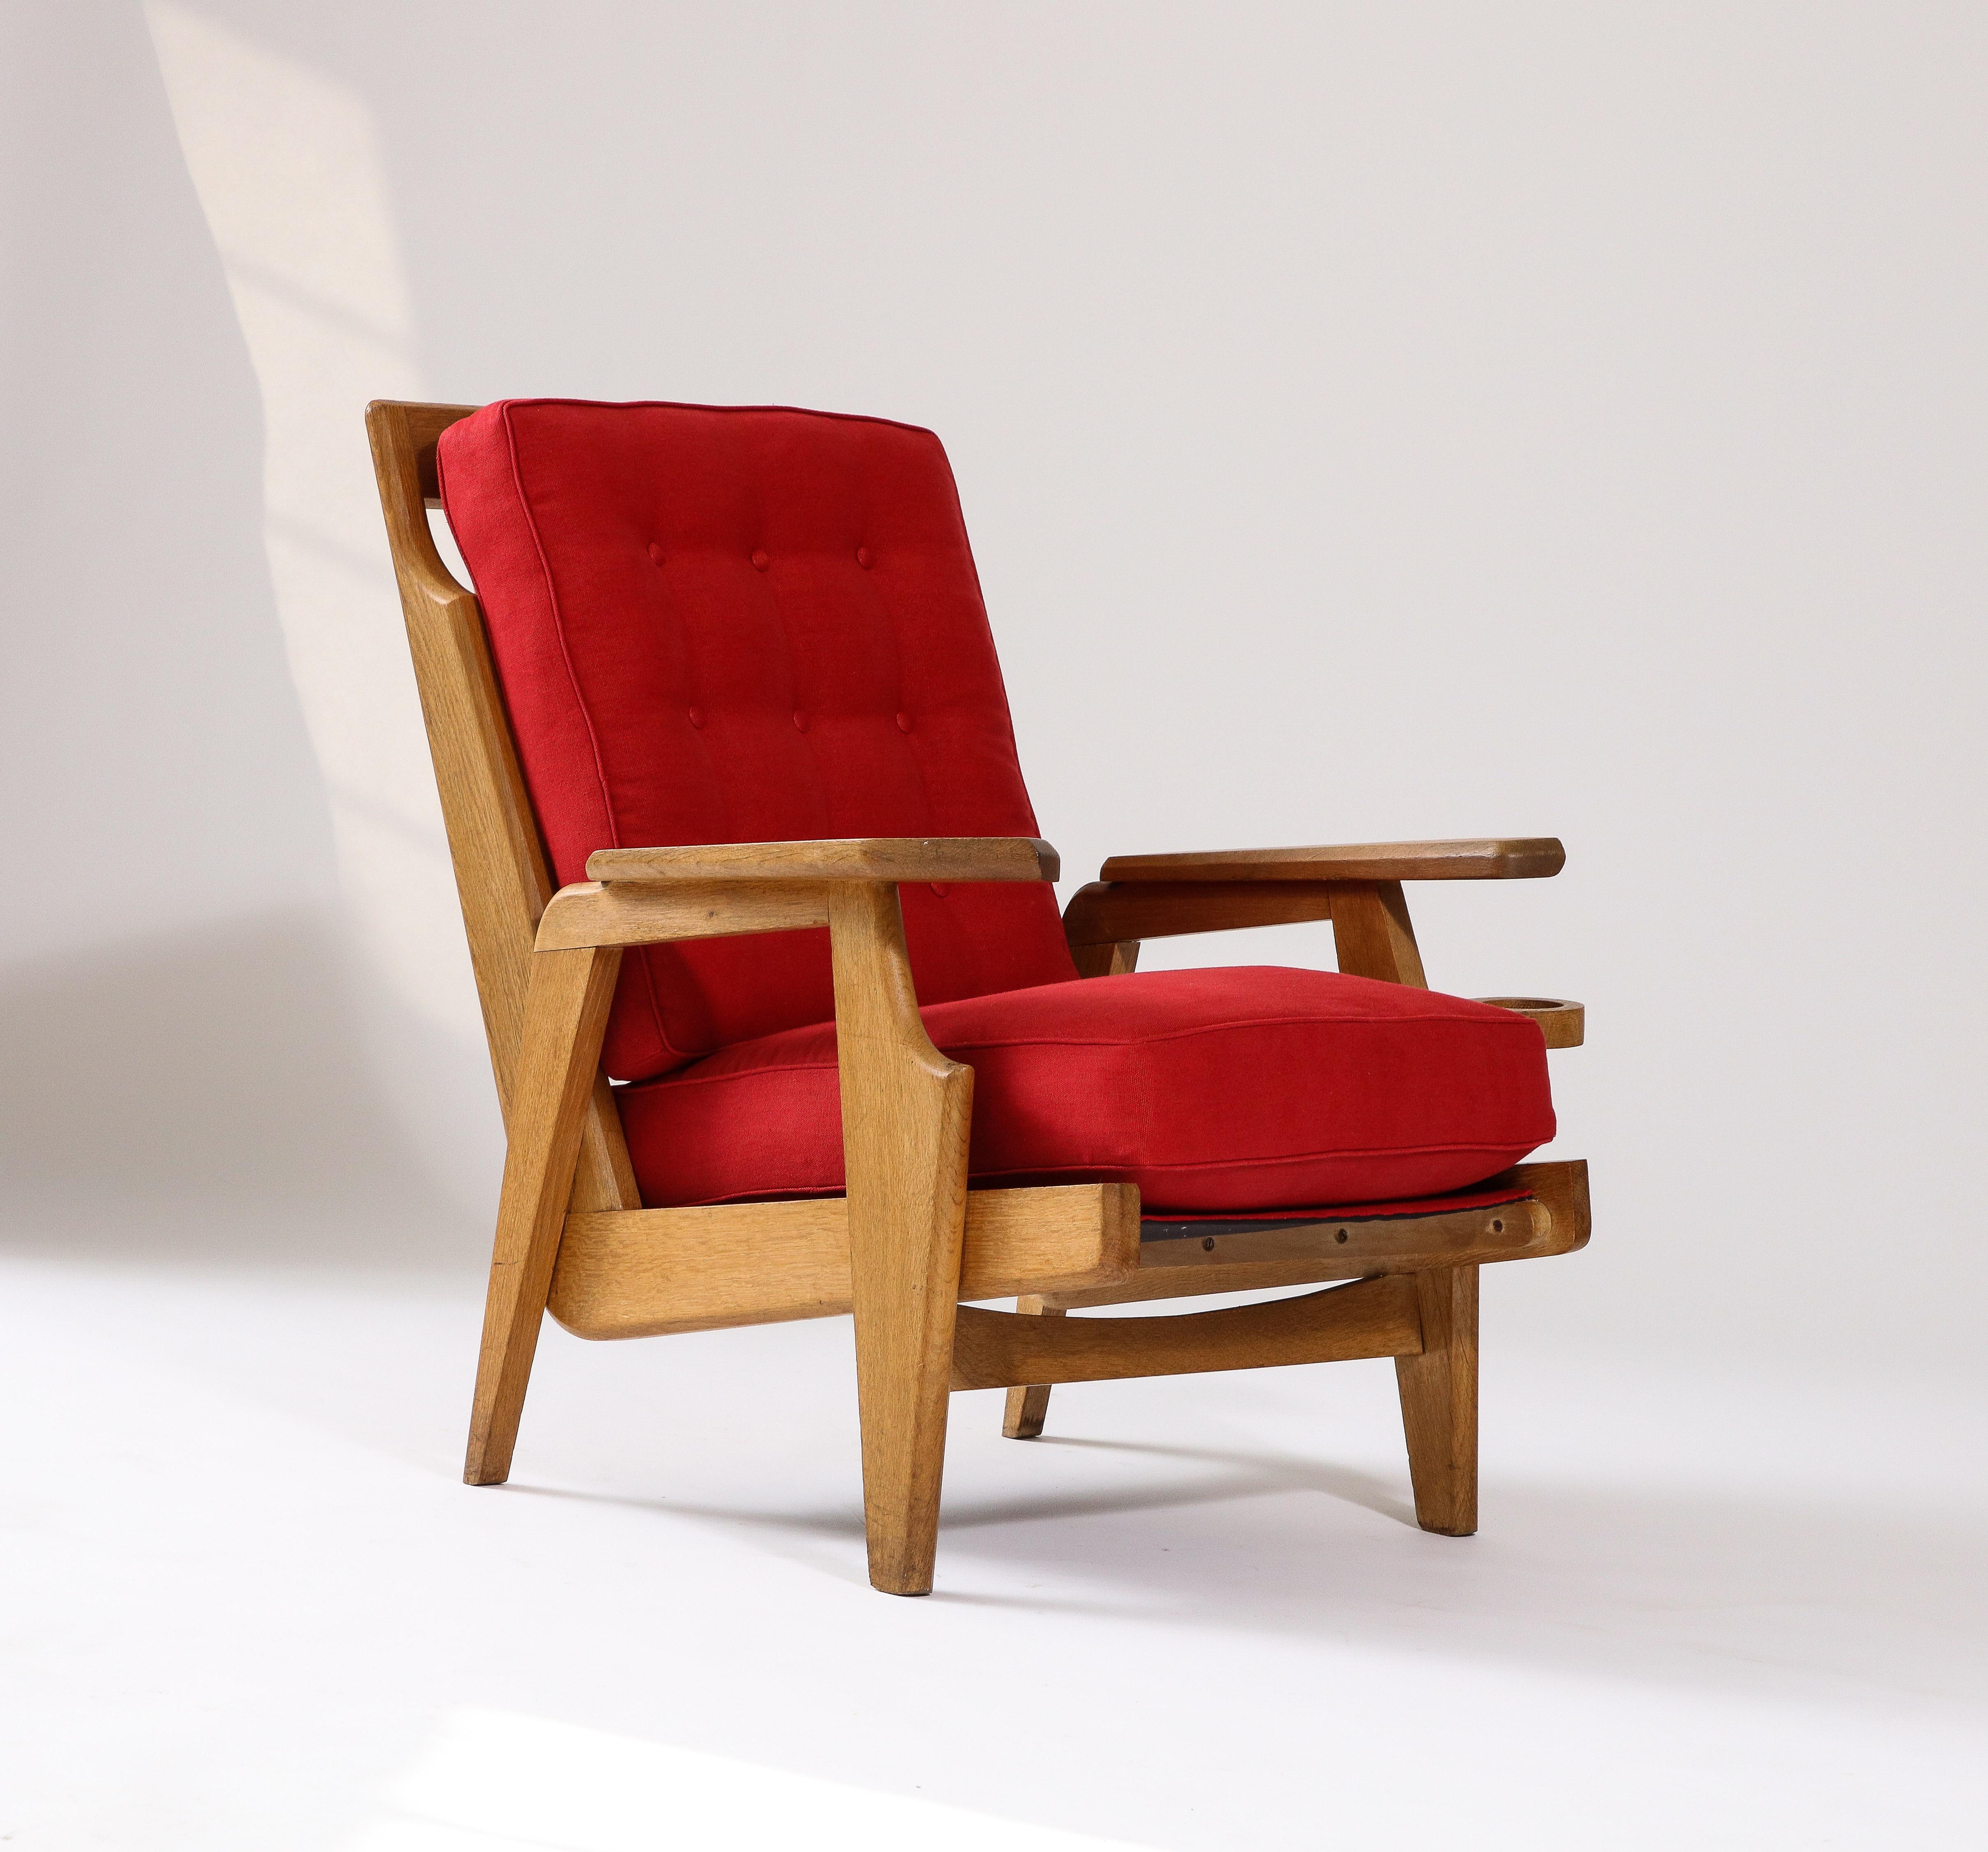 Priced individually; two available. 

Armchair by Guillerme et Chambron, with a stylish 